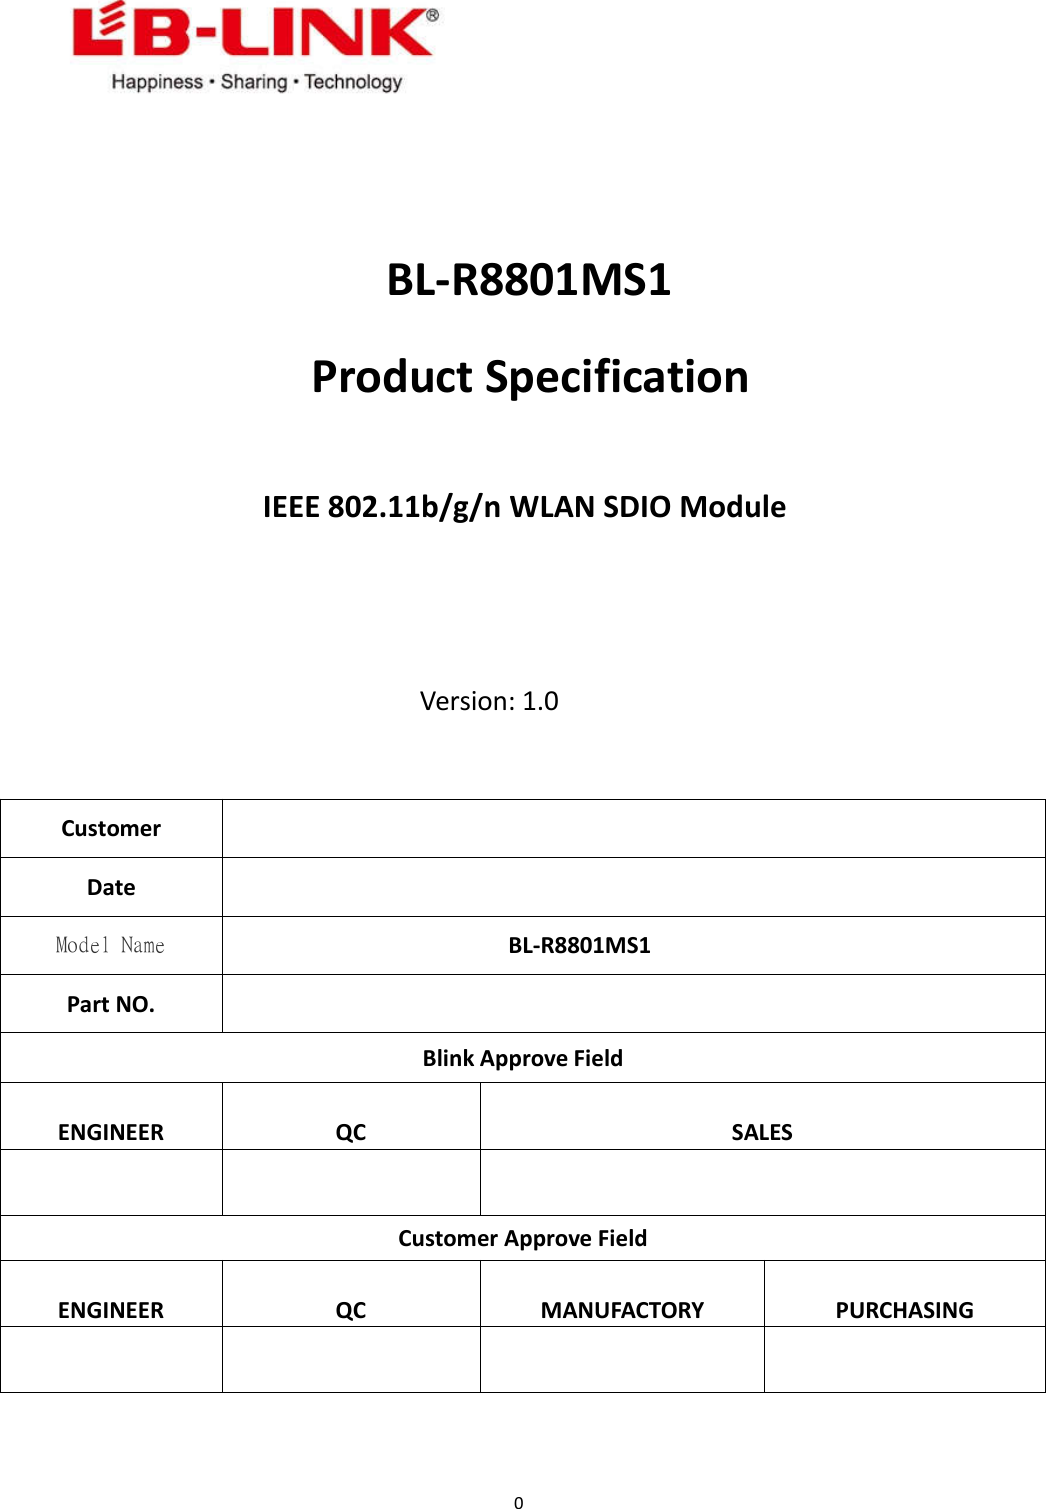 0BL-R8801MS1Product SpecificationIEEE 802.11b/g/n WLAN SDIO ModuleVersion: 1.0CustomerDateModel Name BL-R8801MS1Part NO.Blink Approve FieldENGINEER QC SALESCustomer Approve FieldENGINEER QC MANUFACTORY PURCHASING